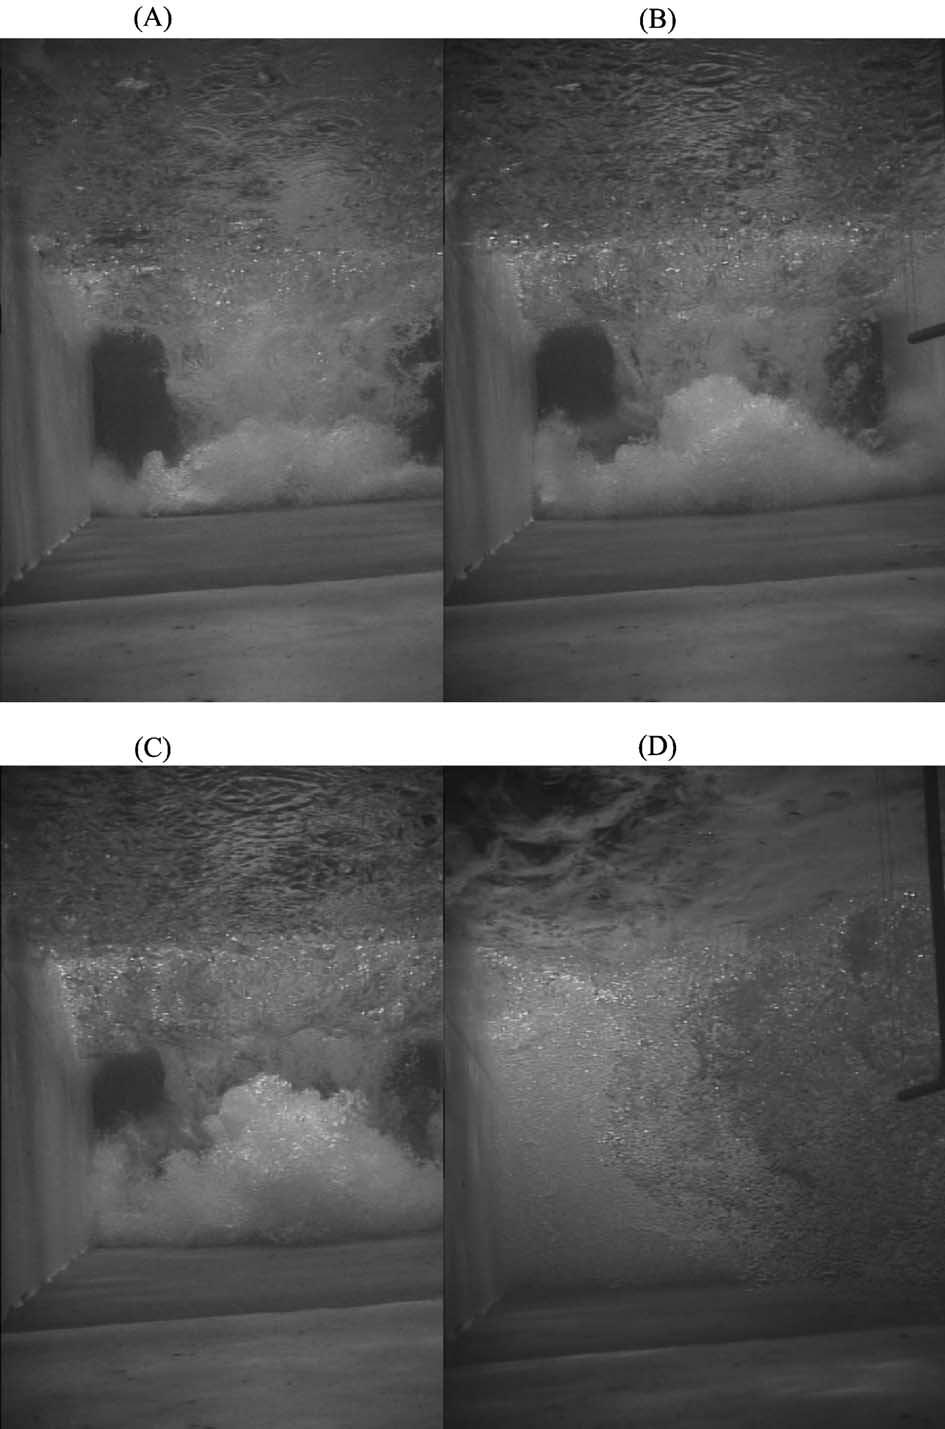 H. Chanson et al. / Coastal Engineering 46 (2002) 139 157 145 Fig. 4. Underwater photographs of the bubbly plume initial water volume: 0.